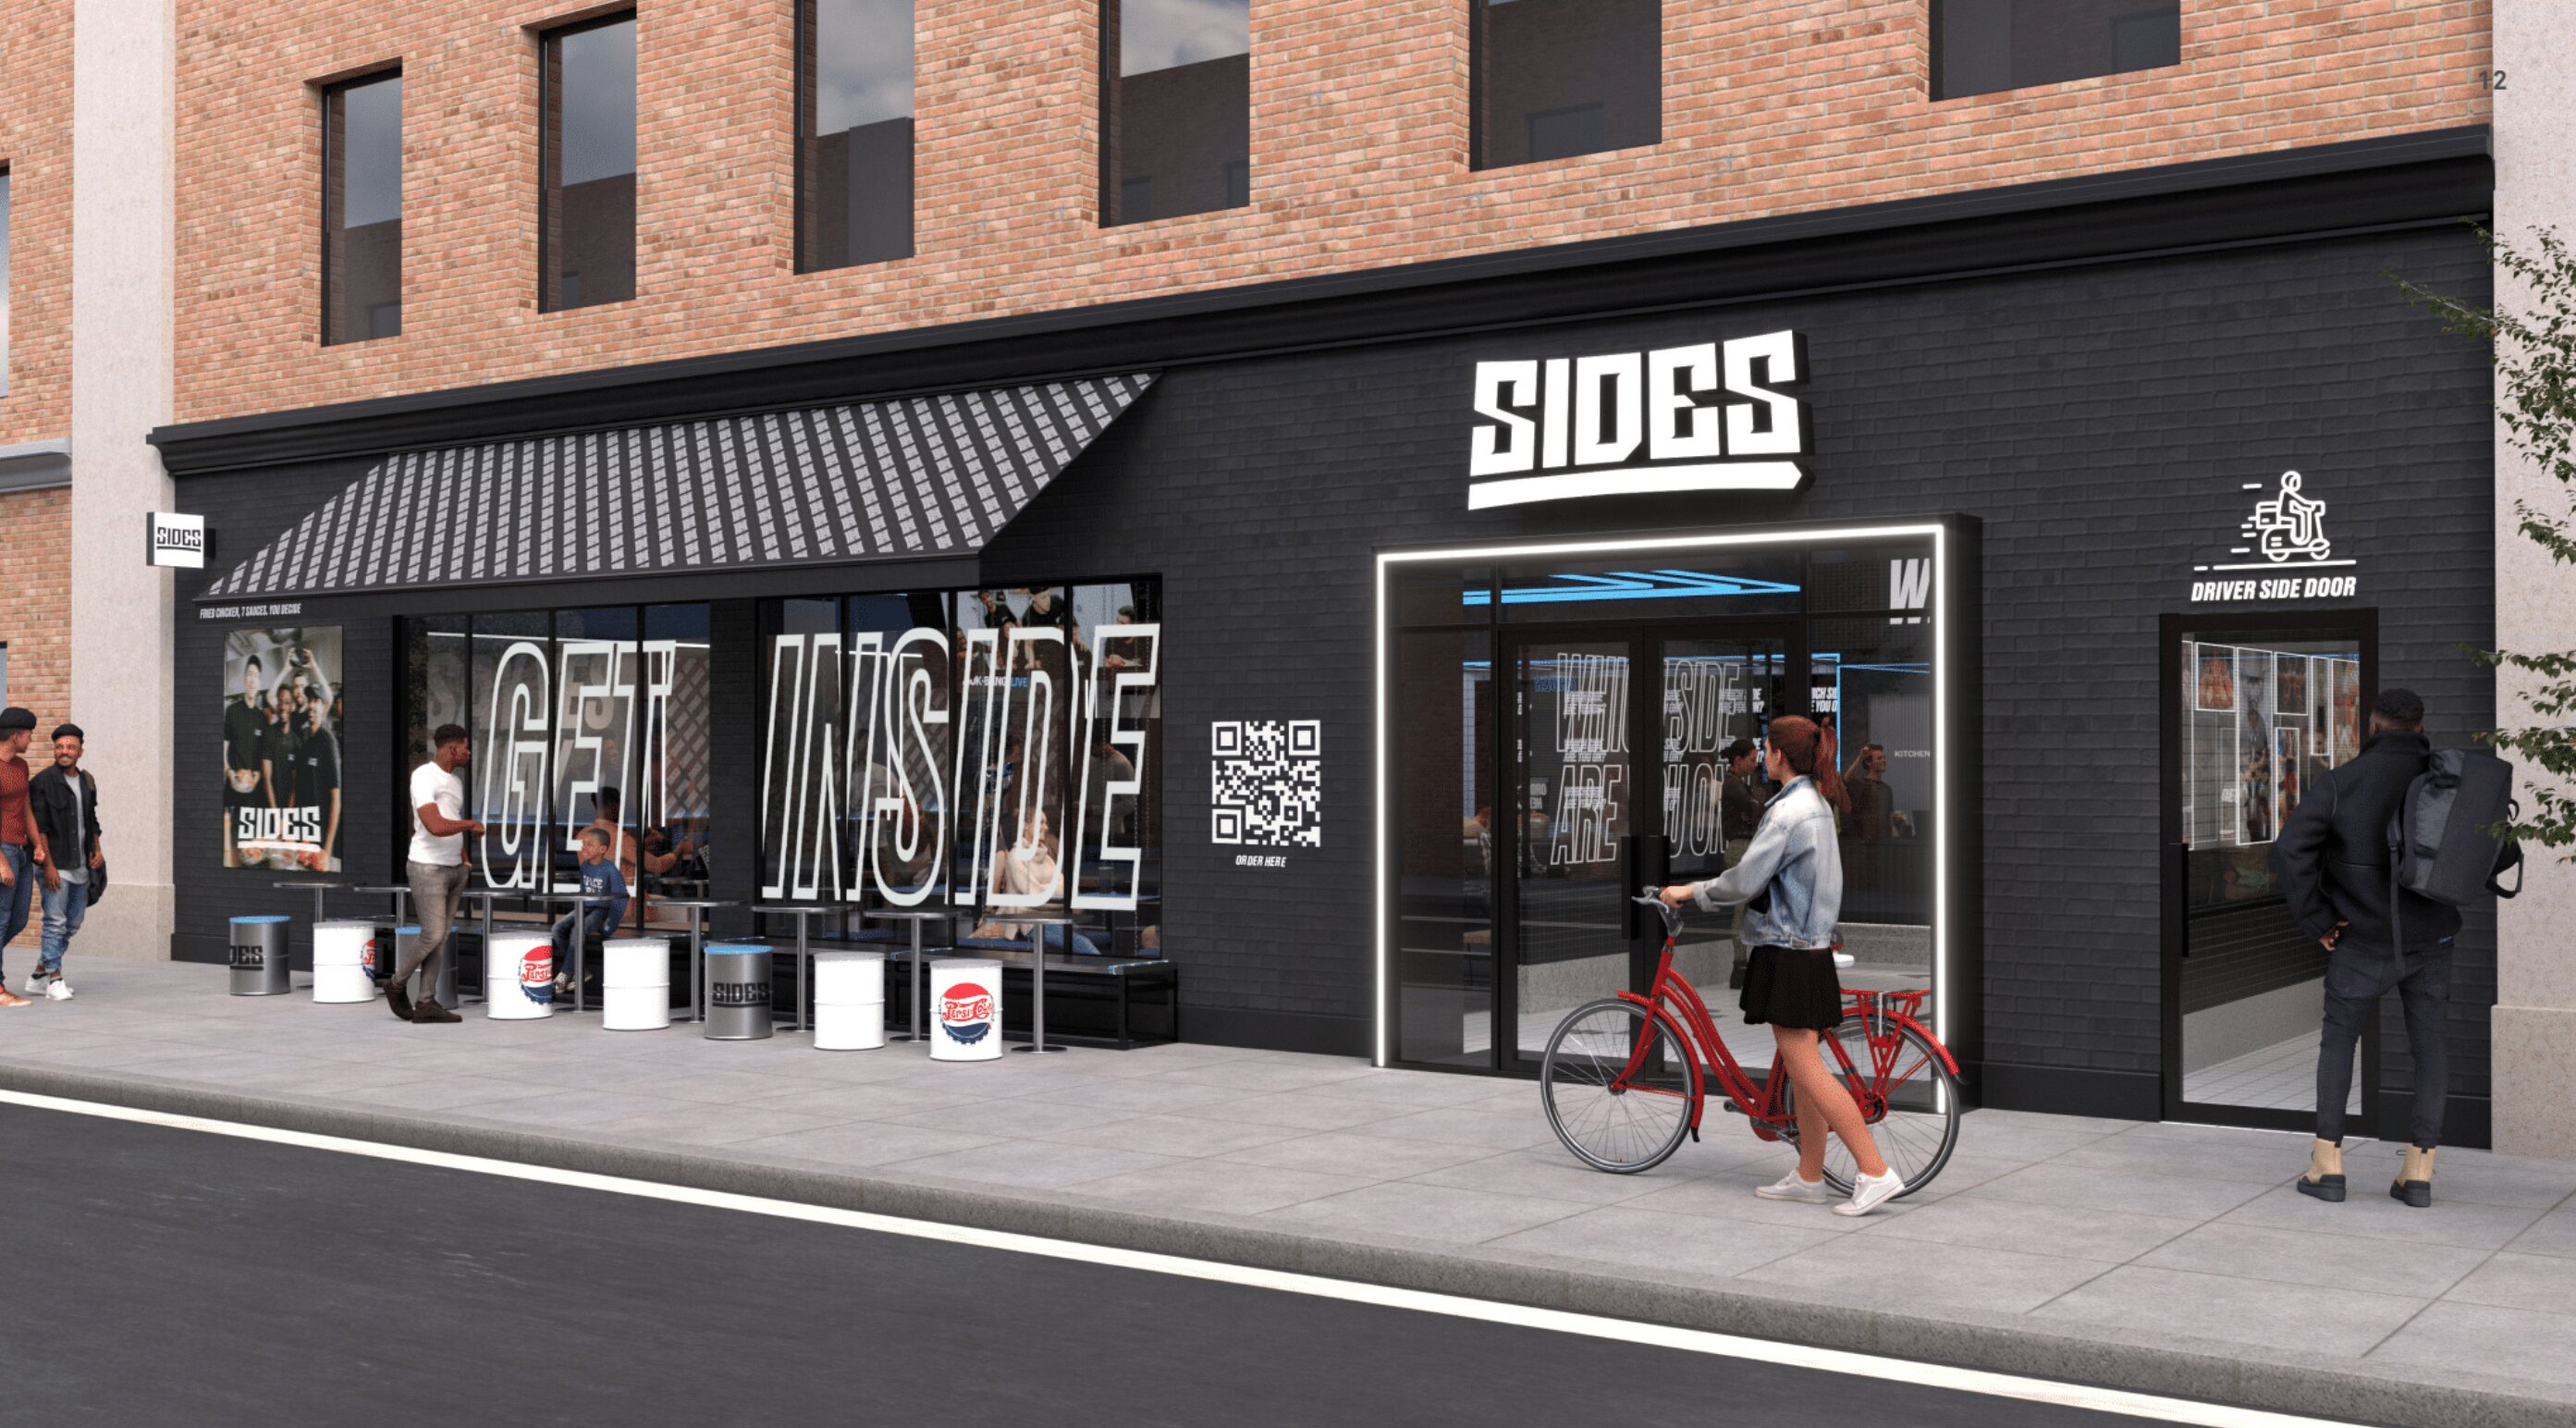 Concept art for Sides' first standalone restaurant